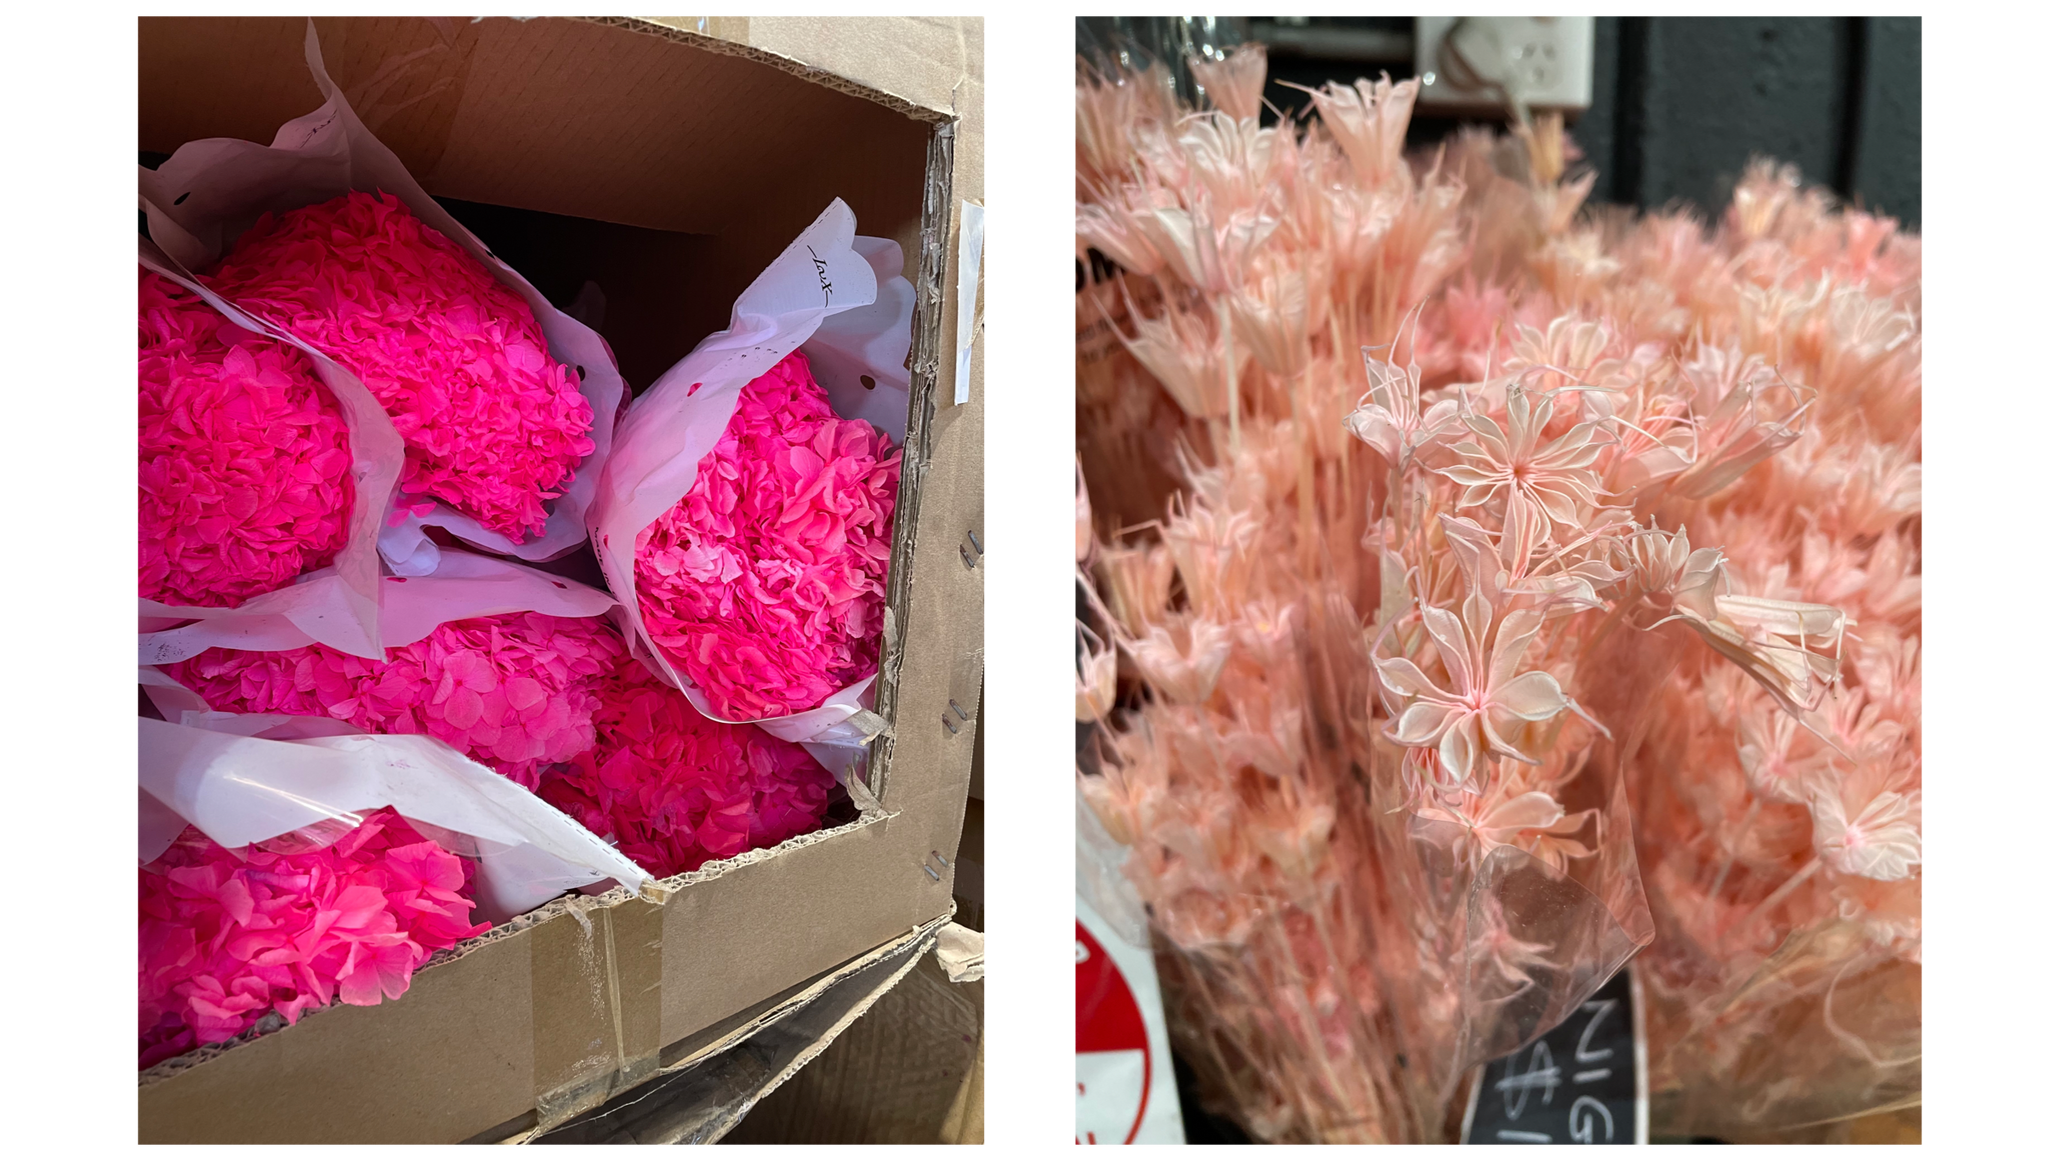 amble and twine dried flowers australia the dark side of dried chemically preserved flowers